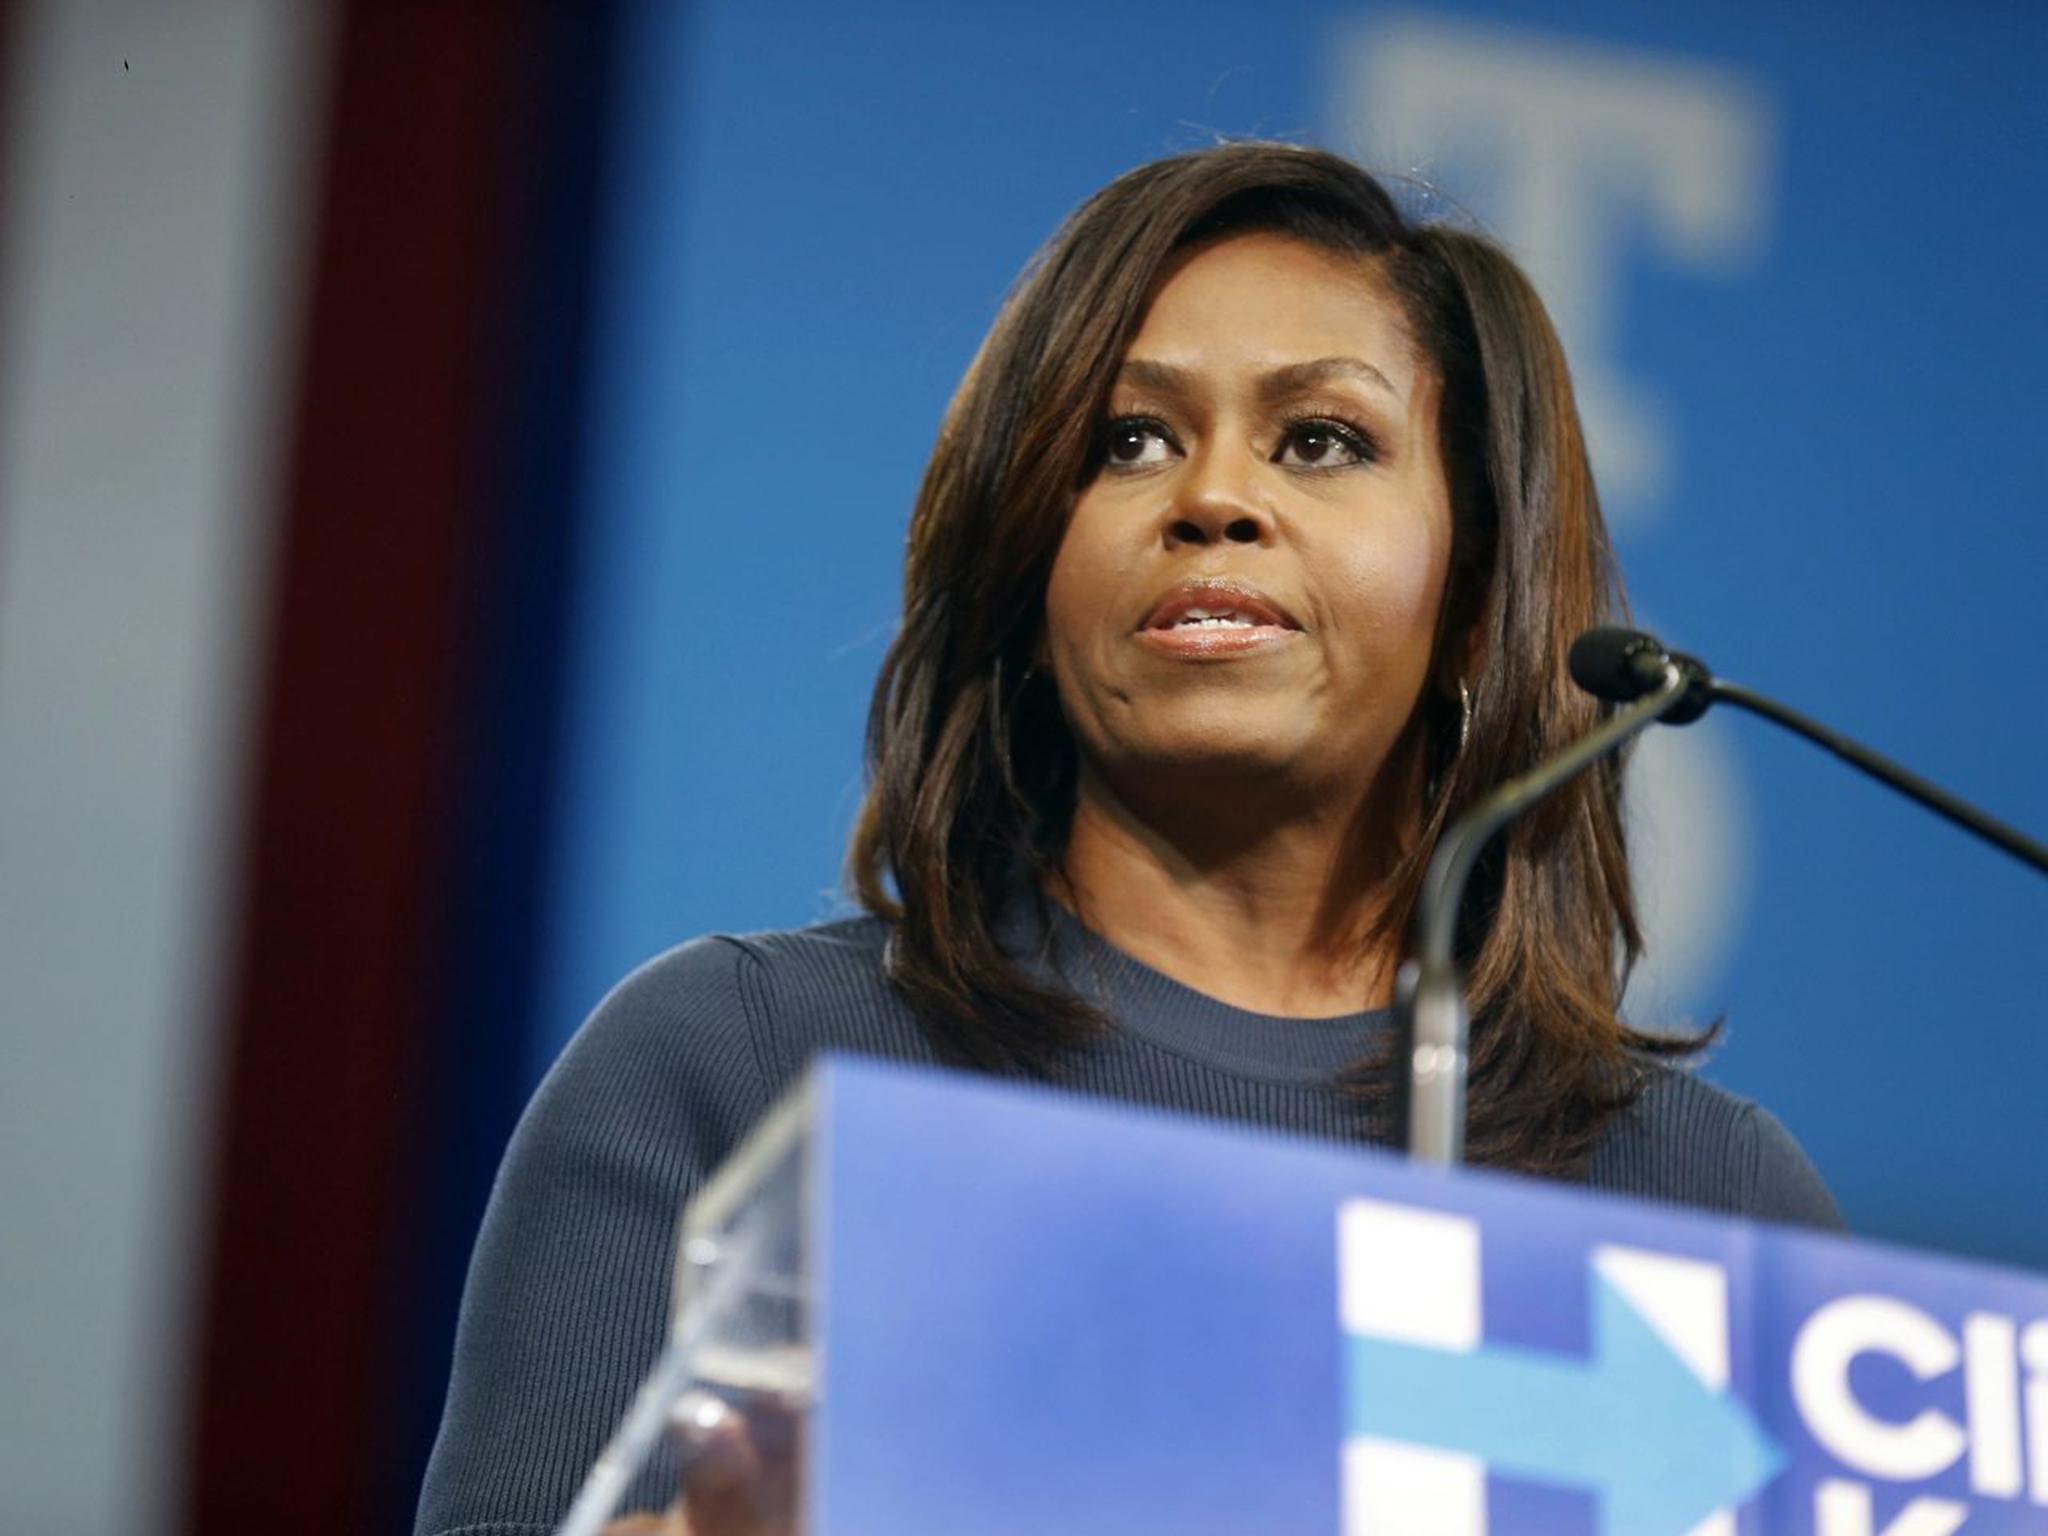 Ms Obama ranked higher than her husband or the current presidential candidates